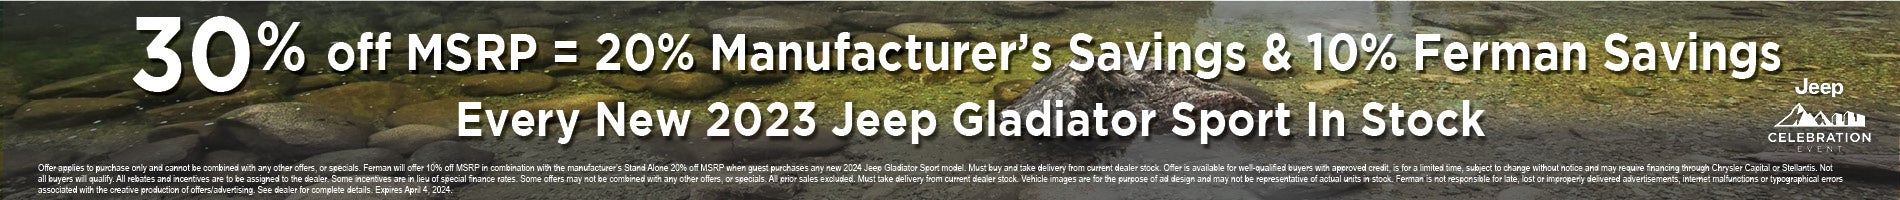 30% off MSRP on all New 2023 Jeep Gladiator Sports